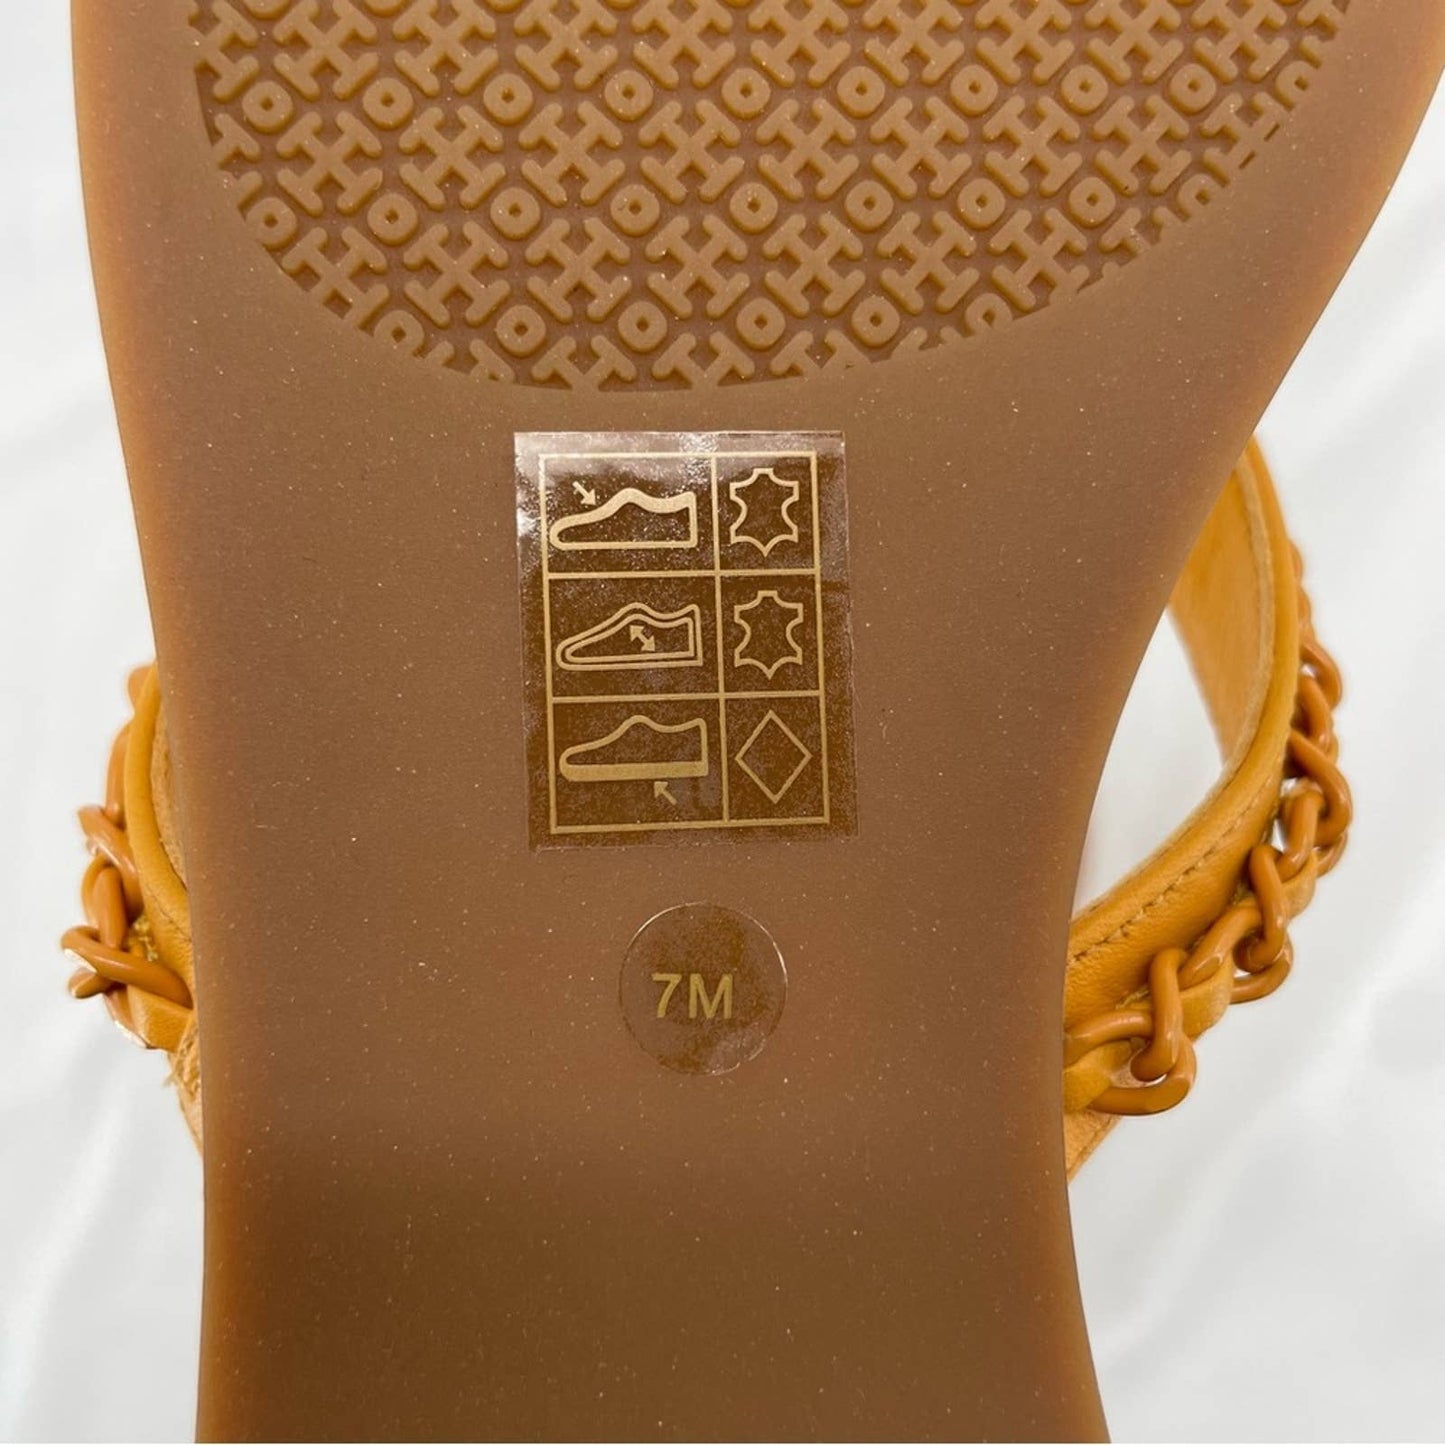 Tory Burch Everly Chain Thong Sandals Nappa Leather Light Turmeric Gold Orange Size 7